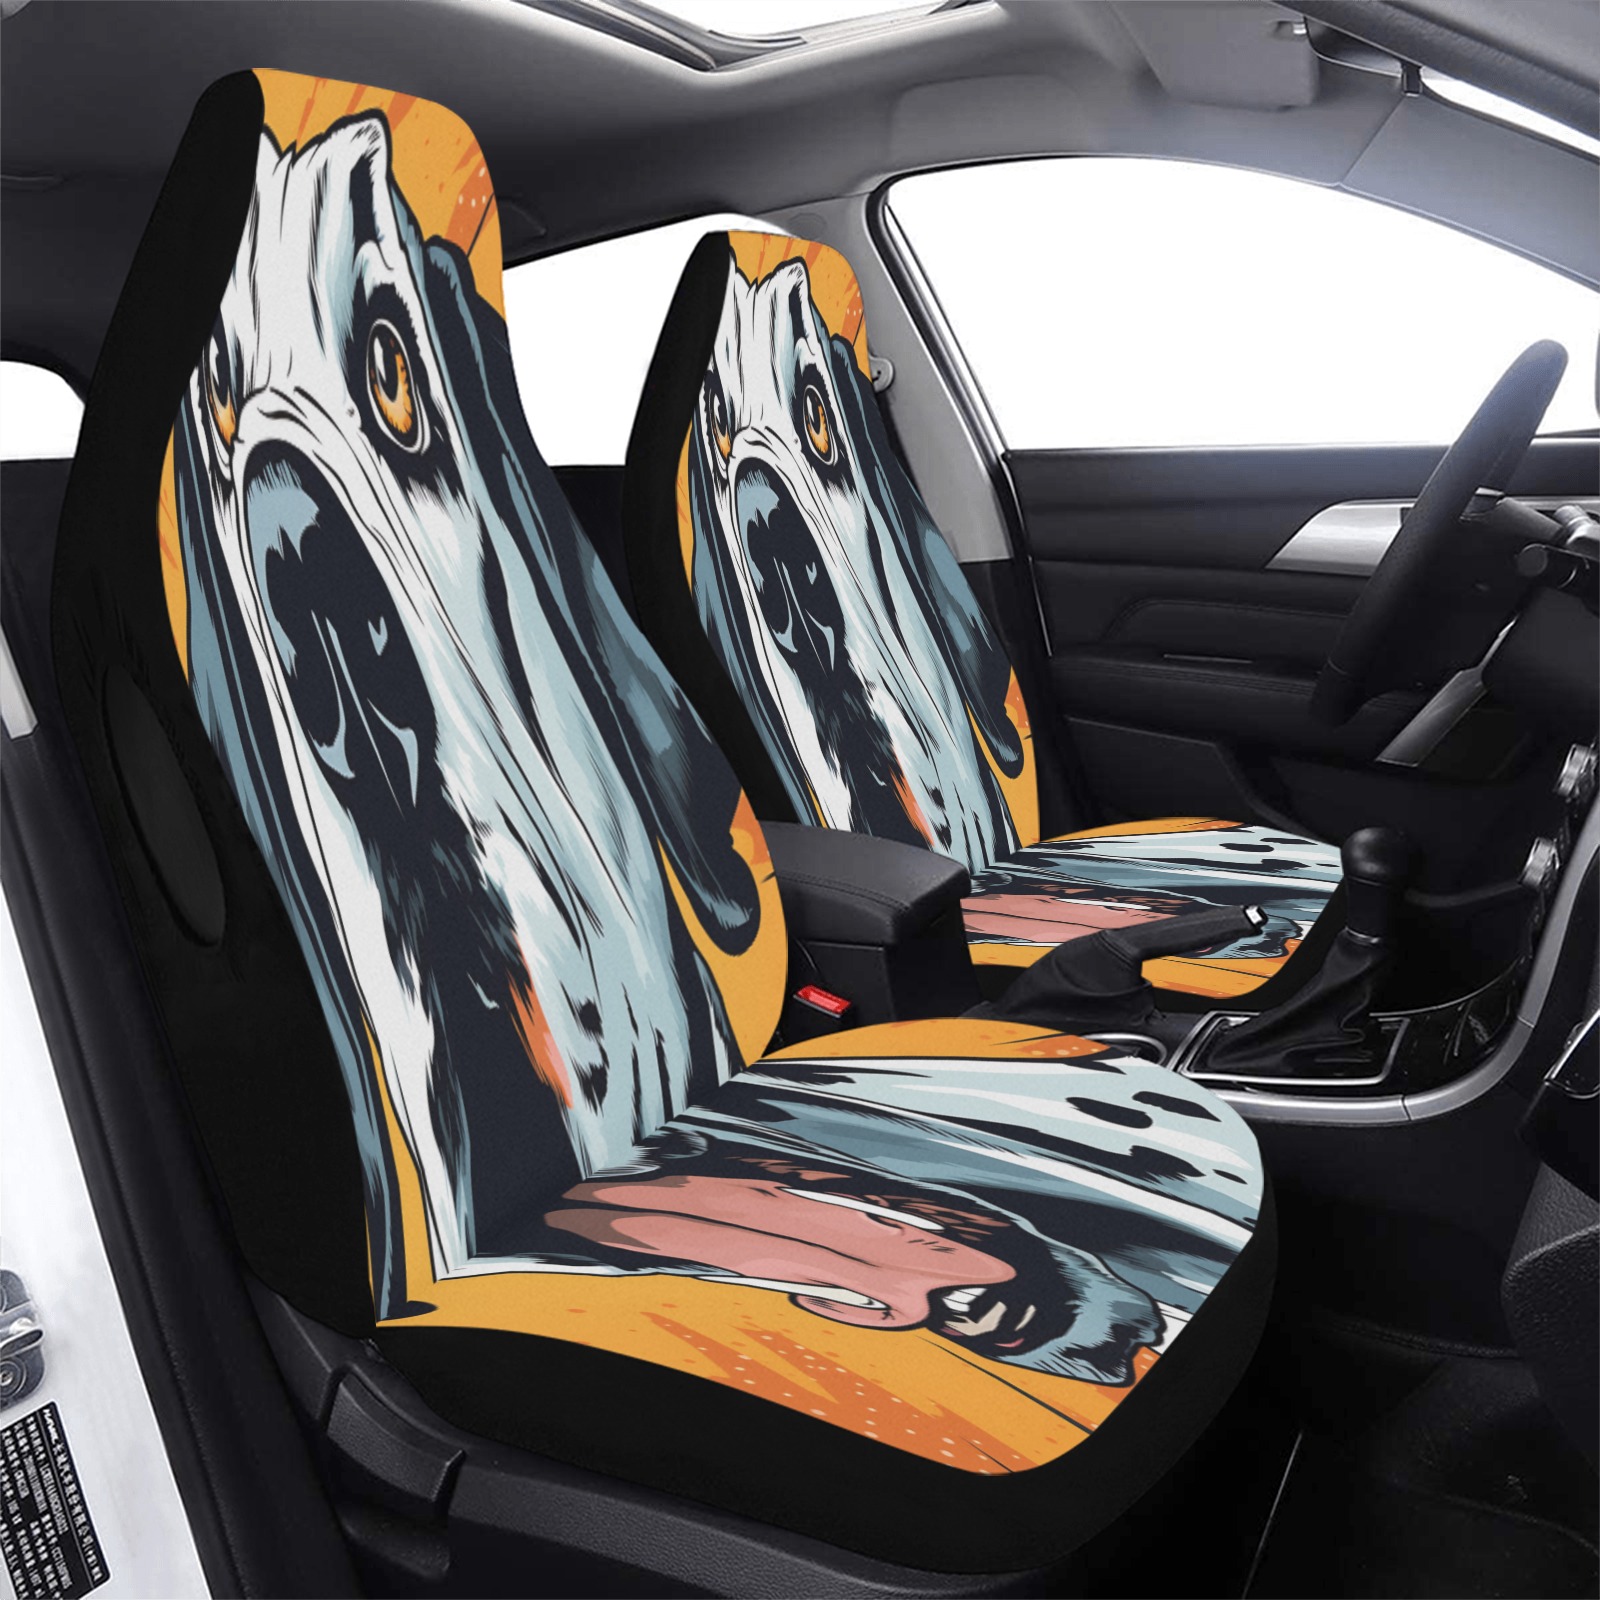 Great Dane Pop Art Car Seat Cover Airbag Compatible (Set of 2)